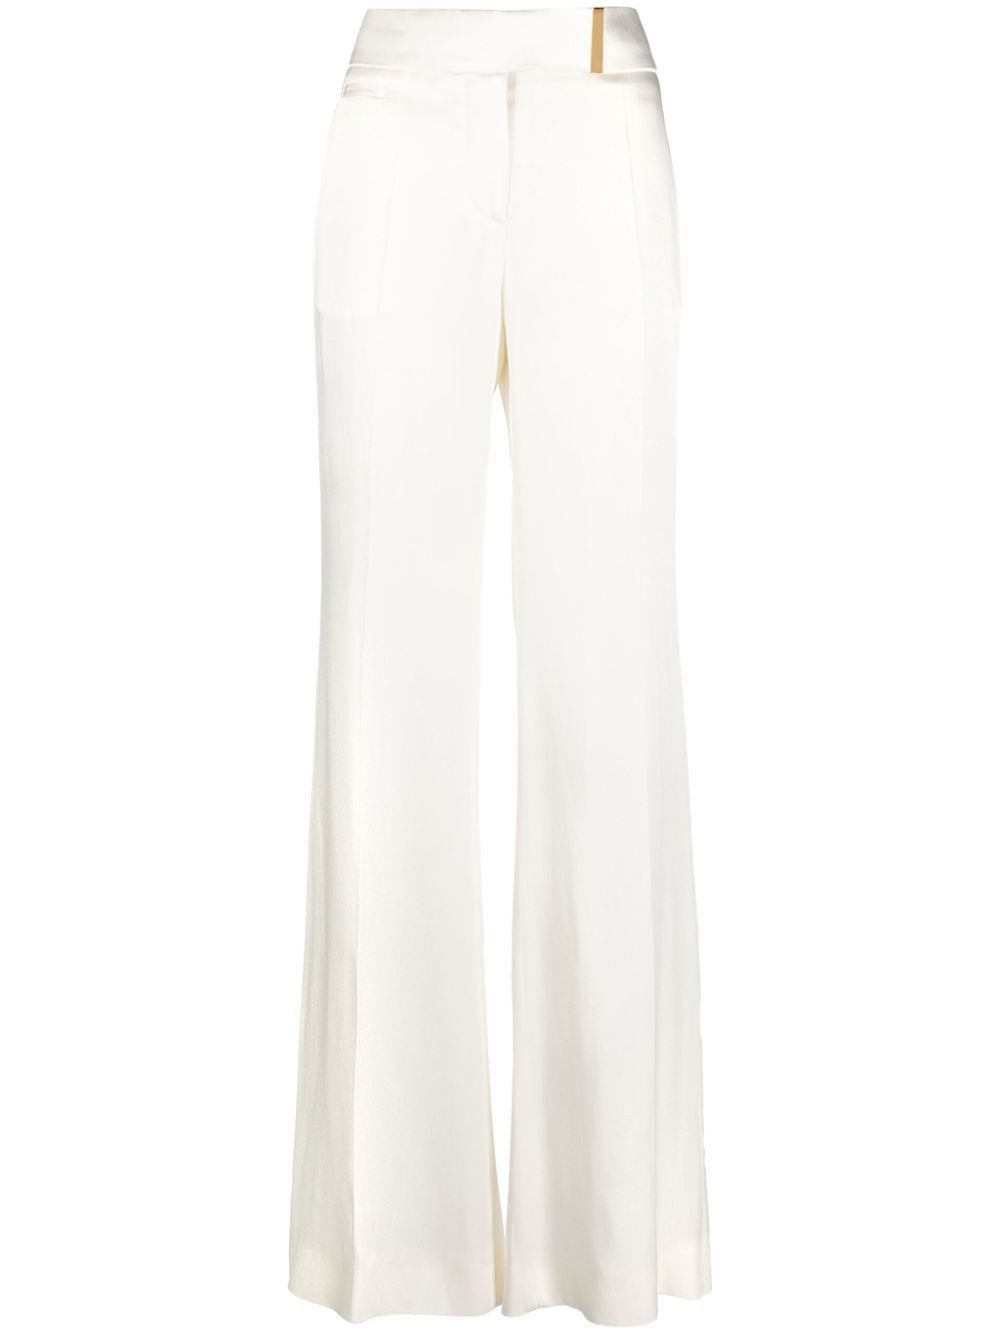 TOM FORD HIGH-WAISTED SATIN WIDE-LEG TROUSERS